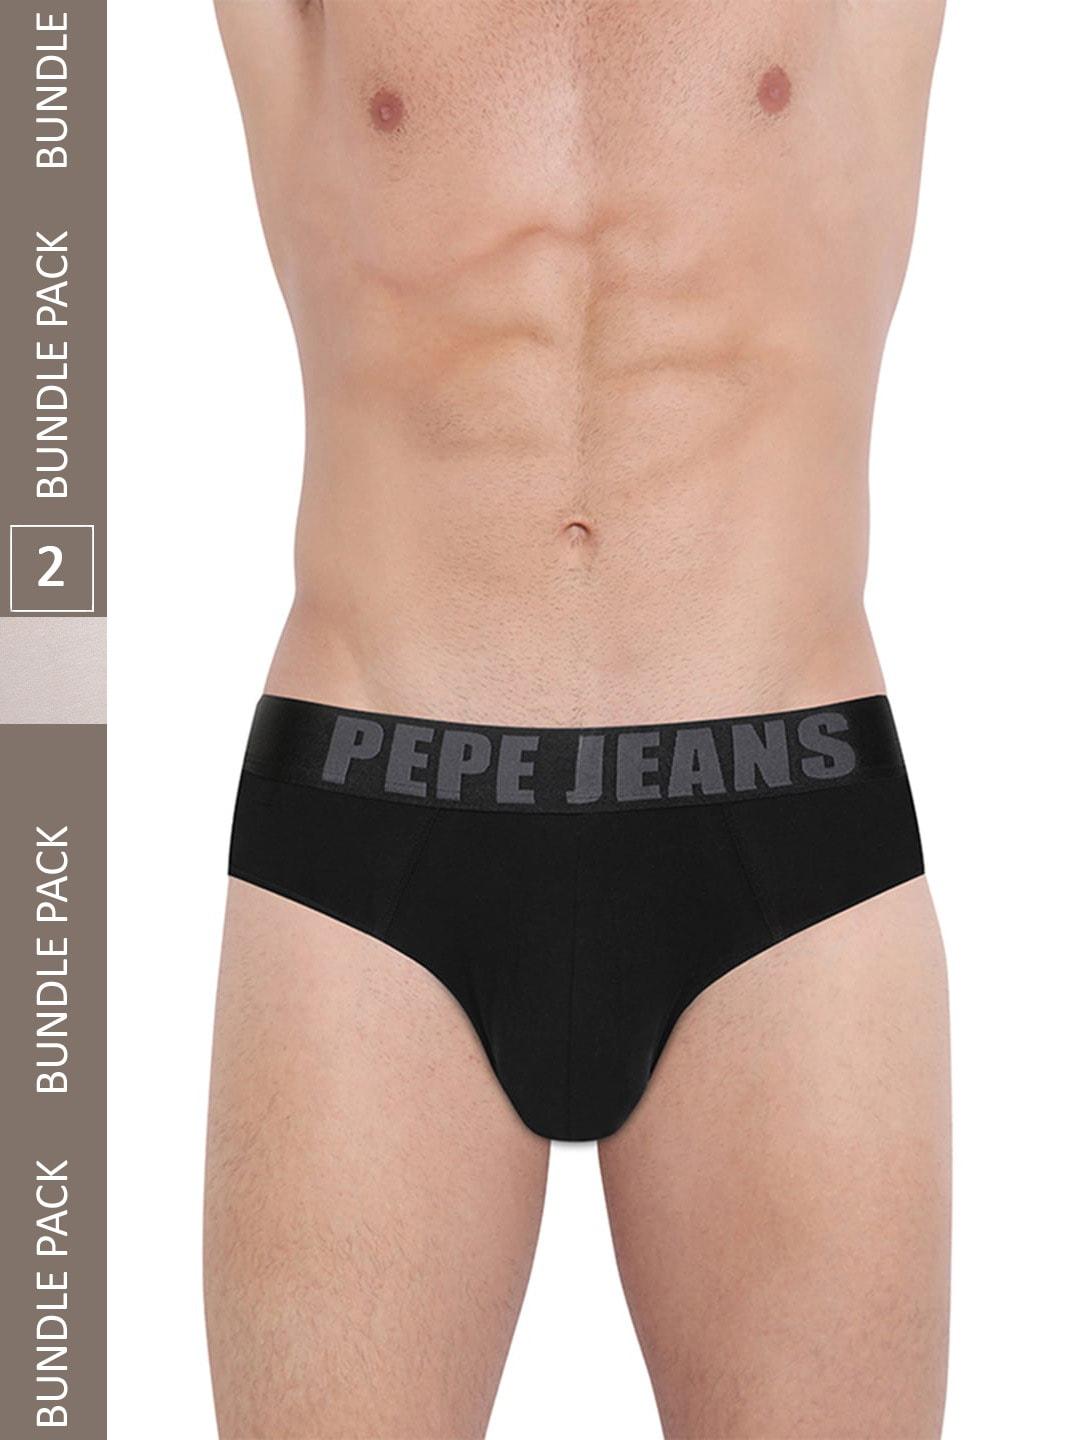 pepe-jeans-men-pack-of-2-deo-soft-anti-microbial-cotton-basic-briefs-8904311371496